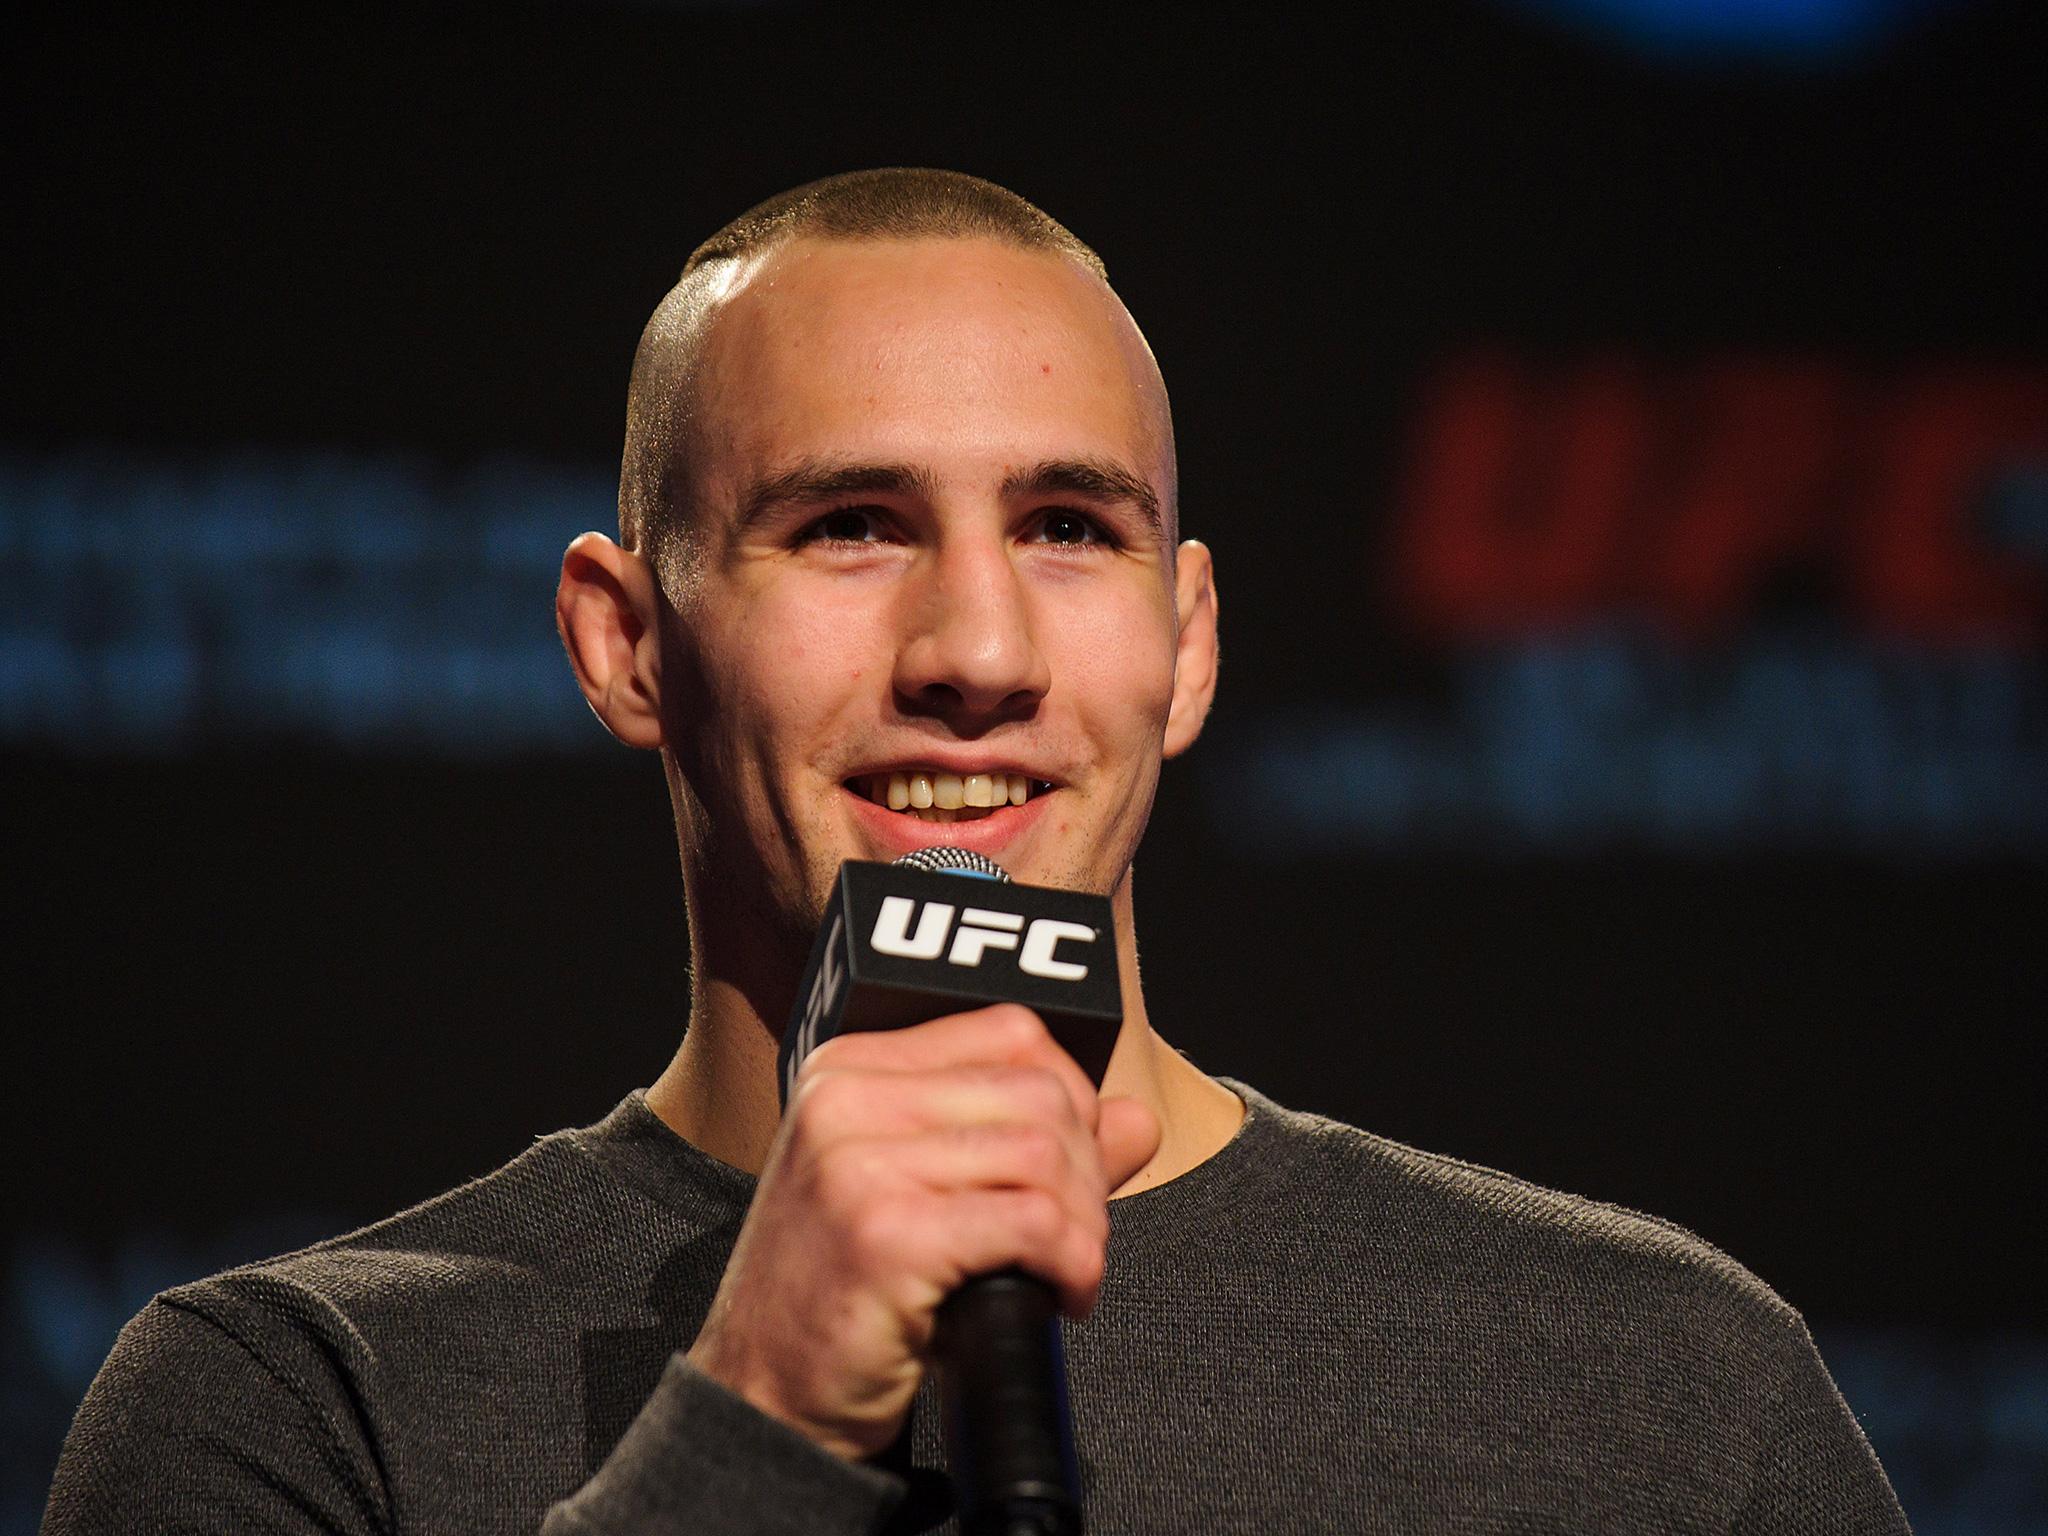 Rory MacDonald, pictured during UFC 189's promotional tour